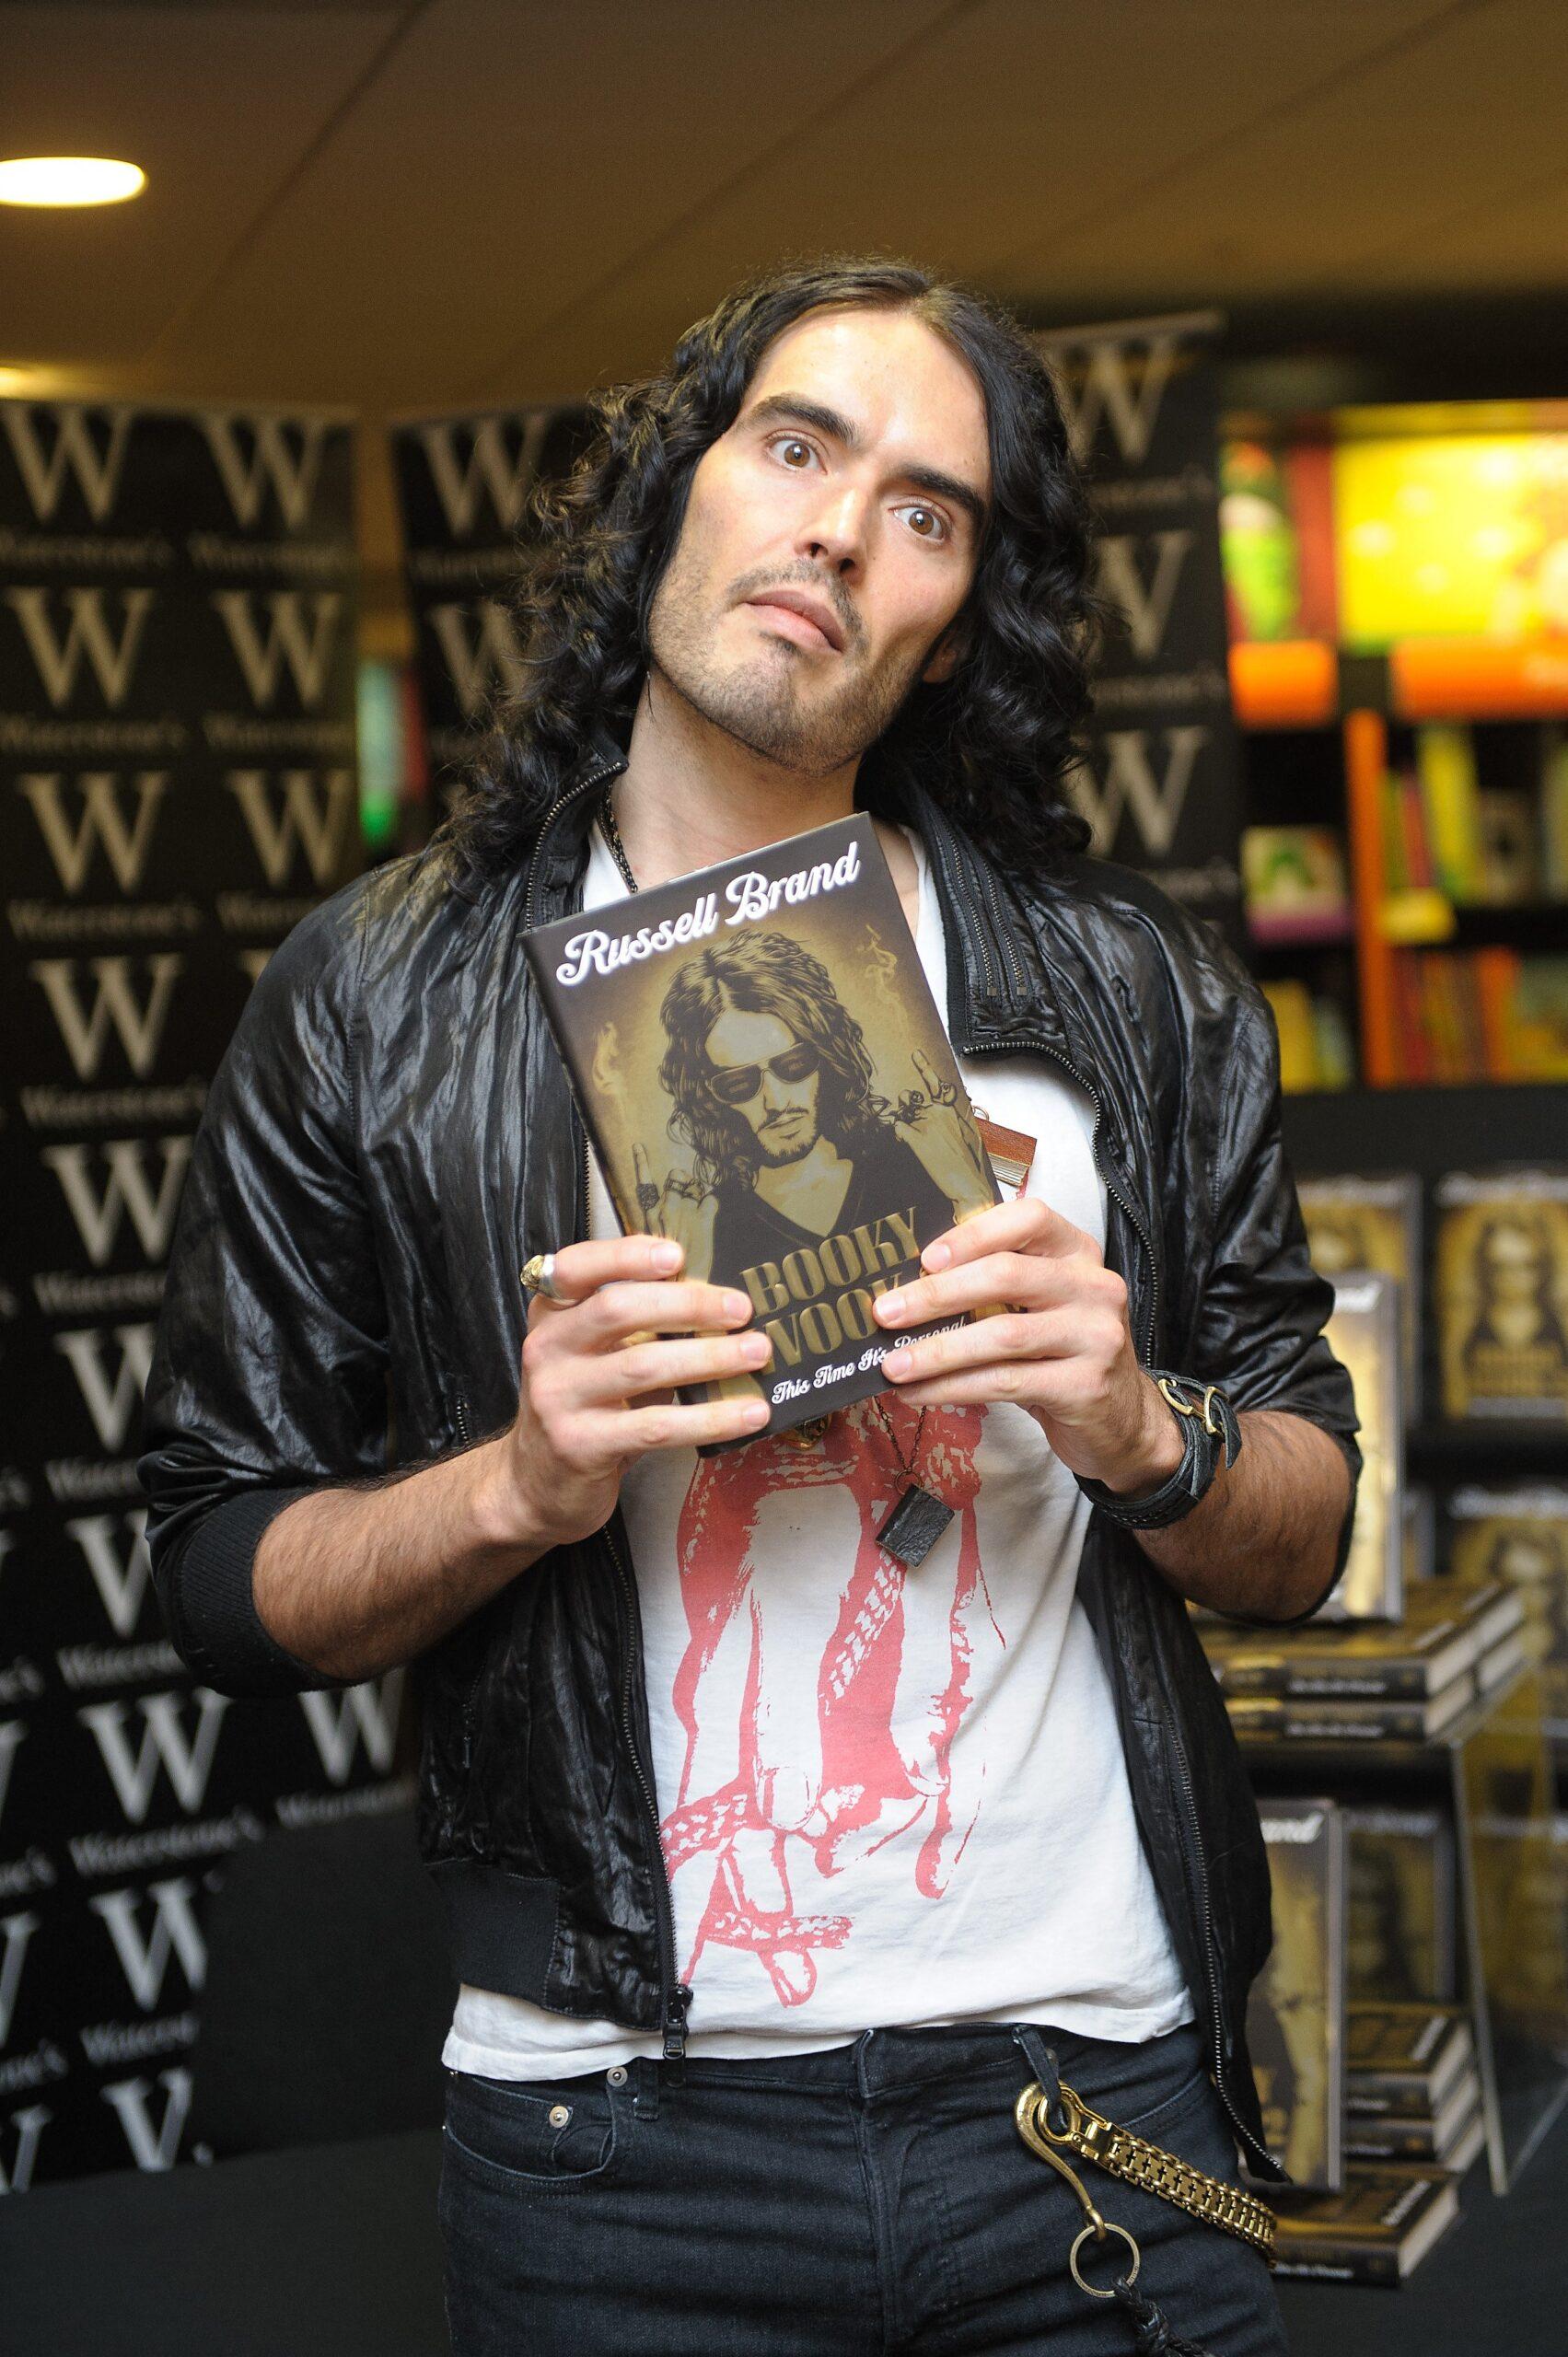 Underfire comedian Russell Brand , pictured here in 2010 in Edinburgh for a book signing for his second book "Booky Wooky 2". Allegations of rape and unwanted sexual behaviour have been levelled at Brand by the Sunday Times newspaper and Channel 4 Dispatch